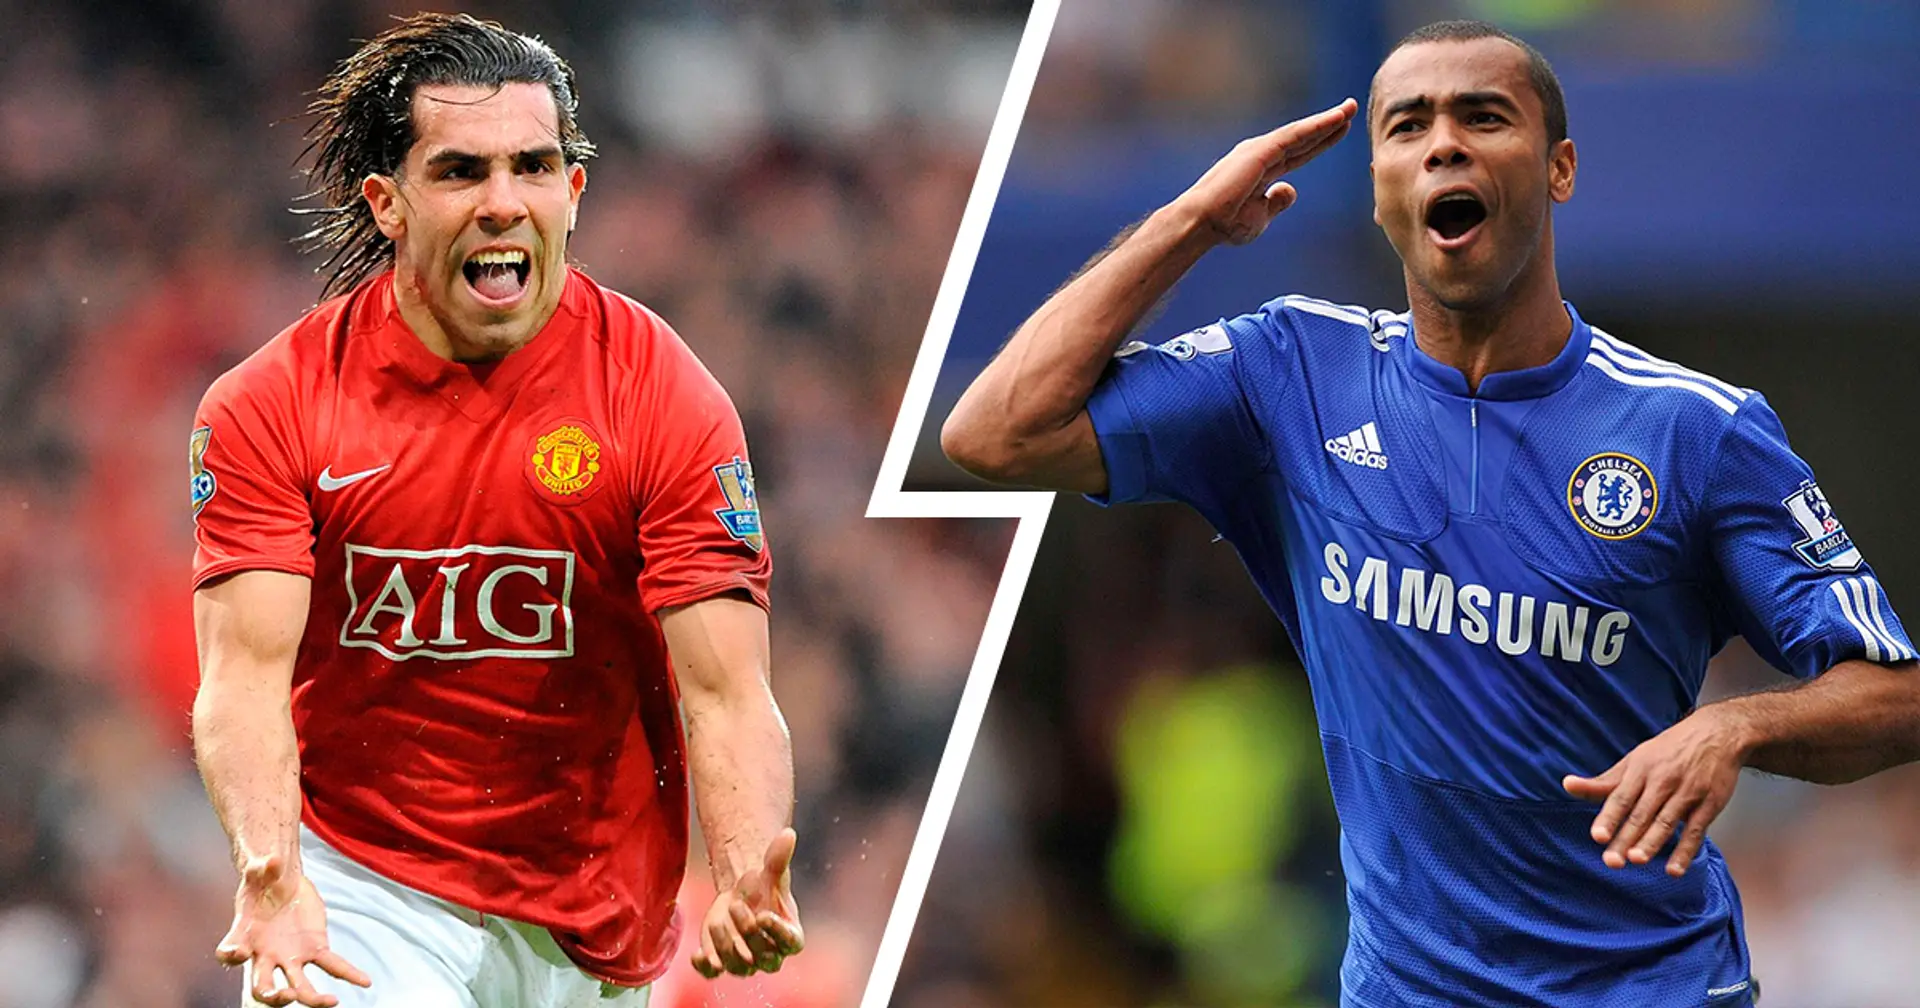 Carlos Tevez and 5 other big names who switched clubs purely for money